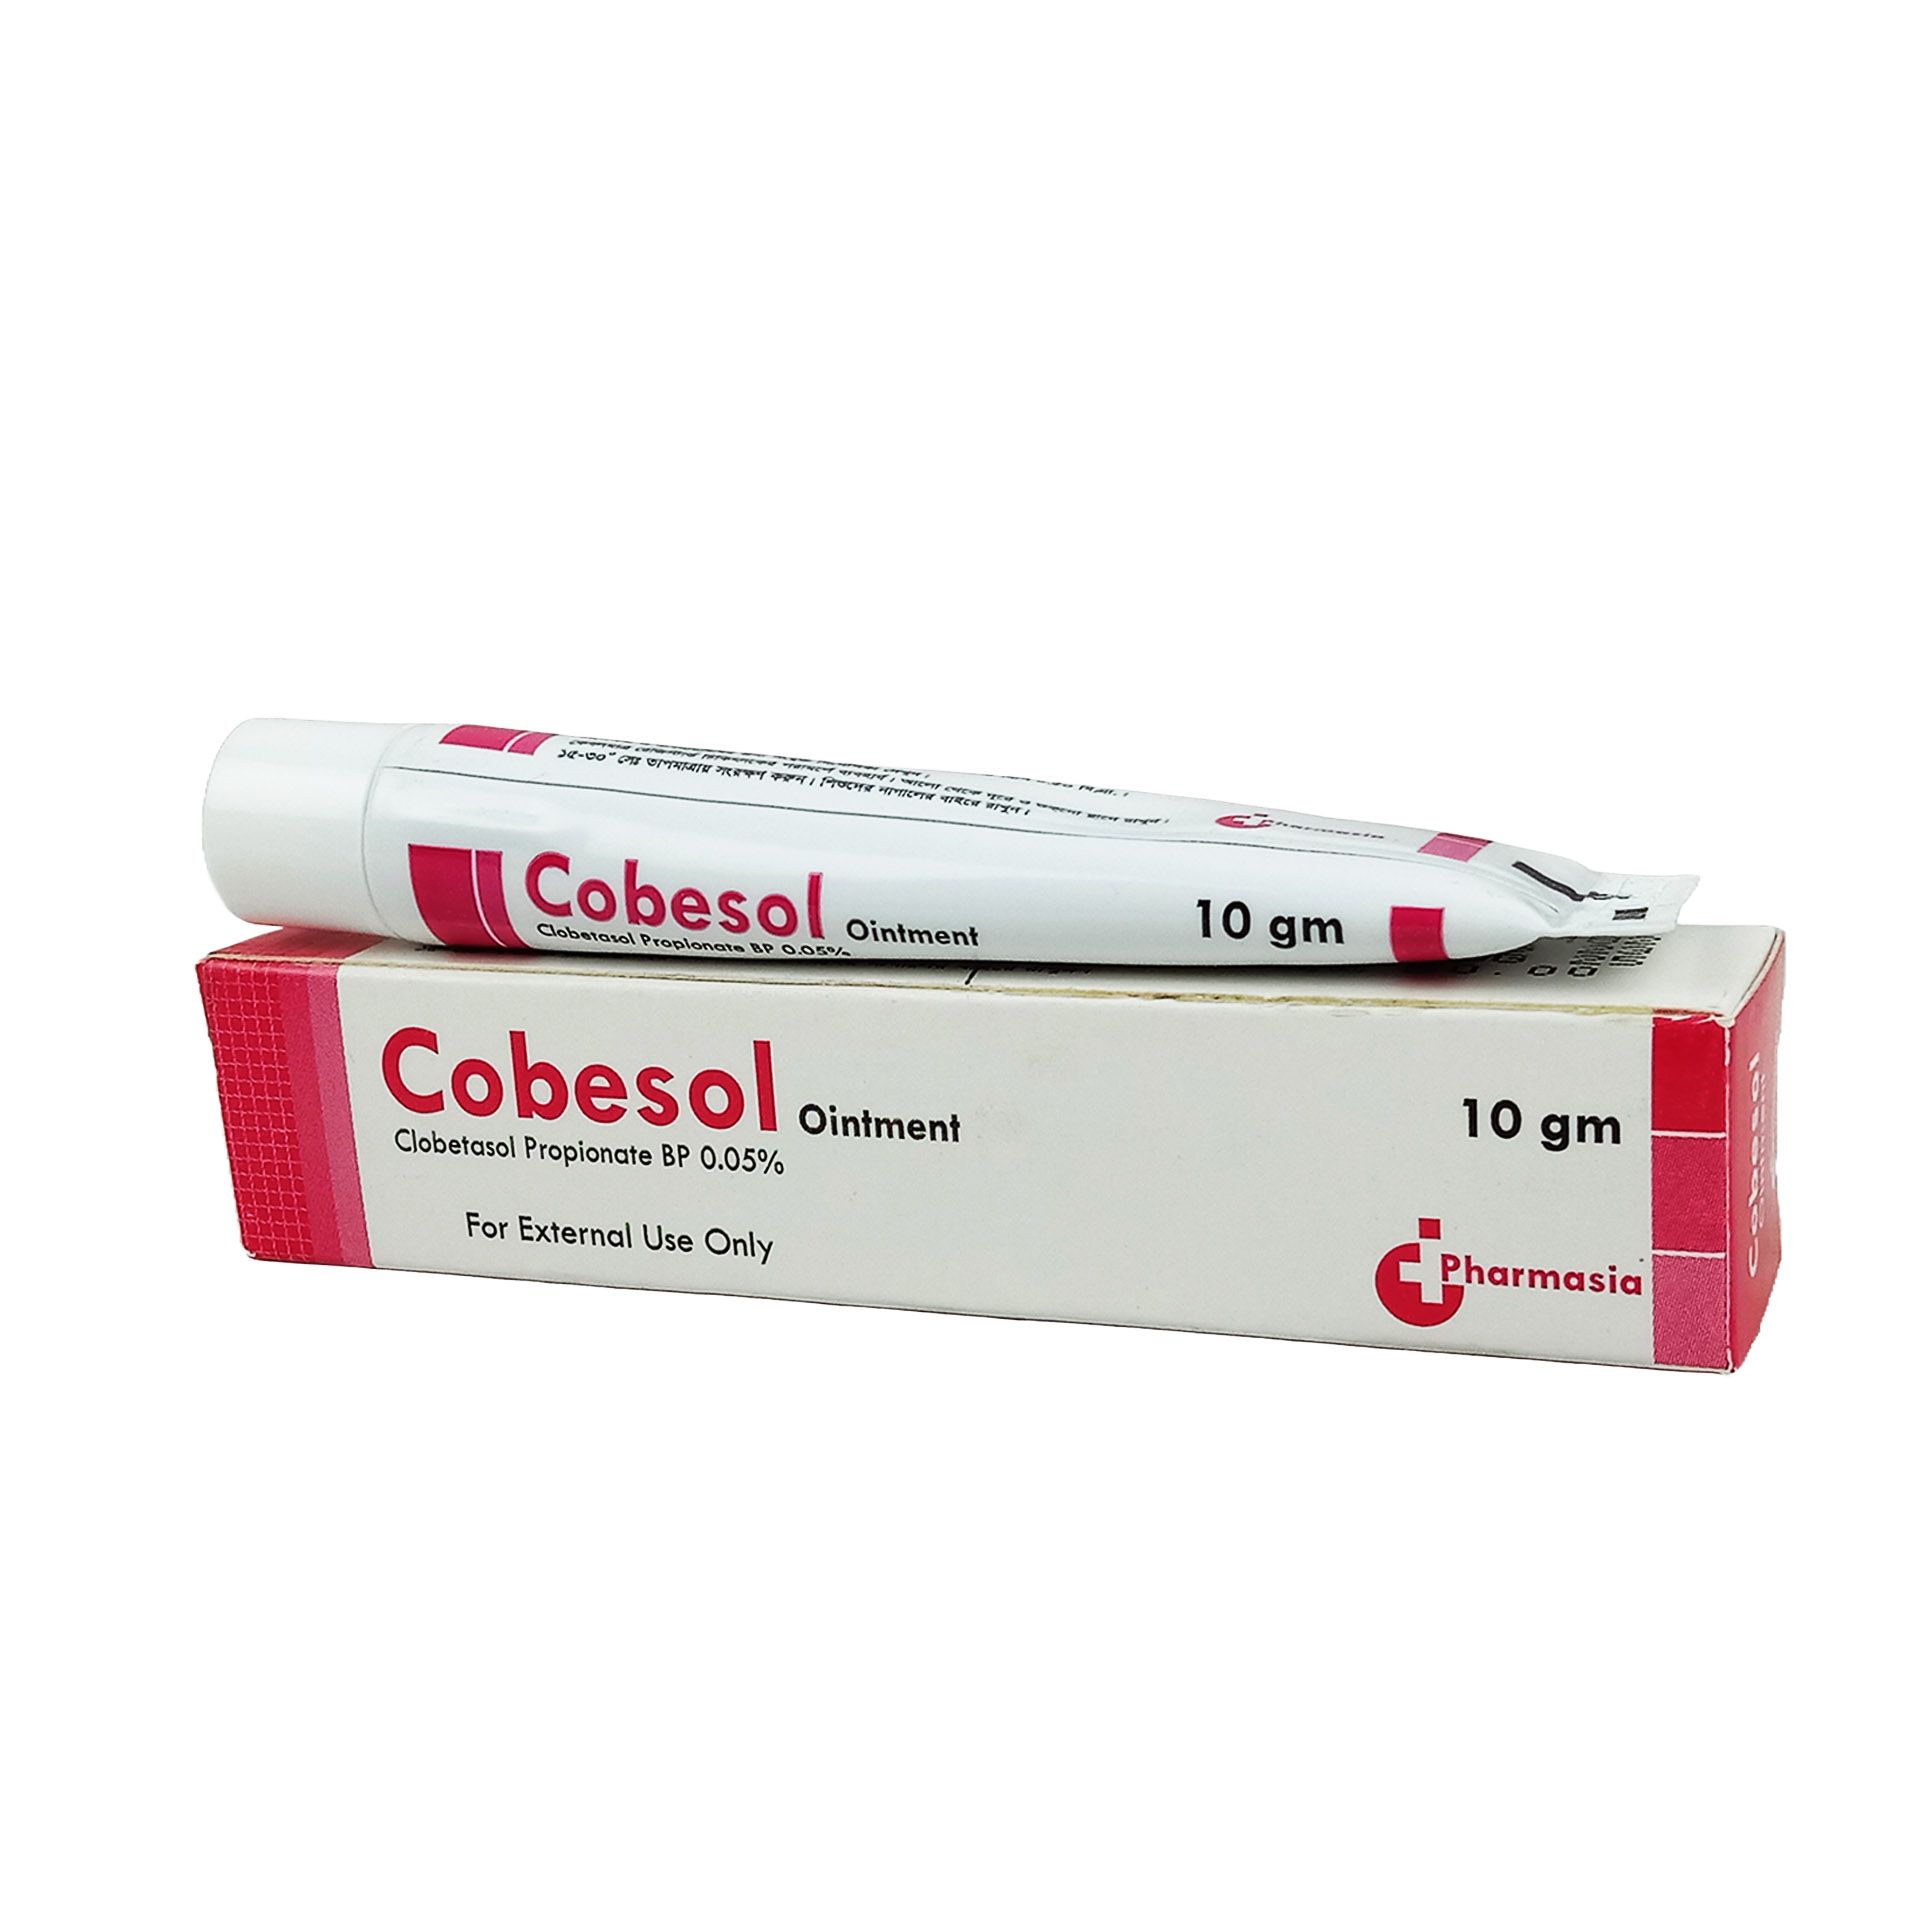 Cobesol 0.05% Ointment